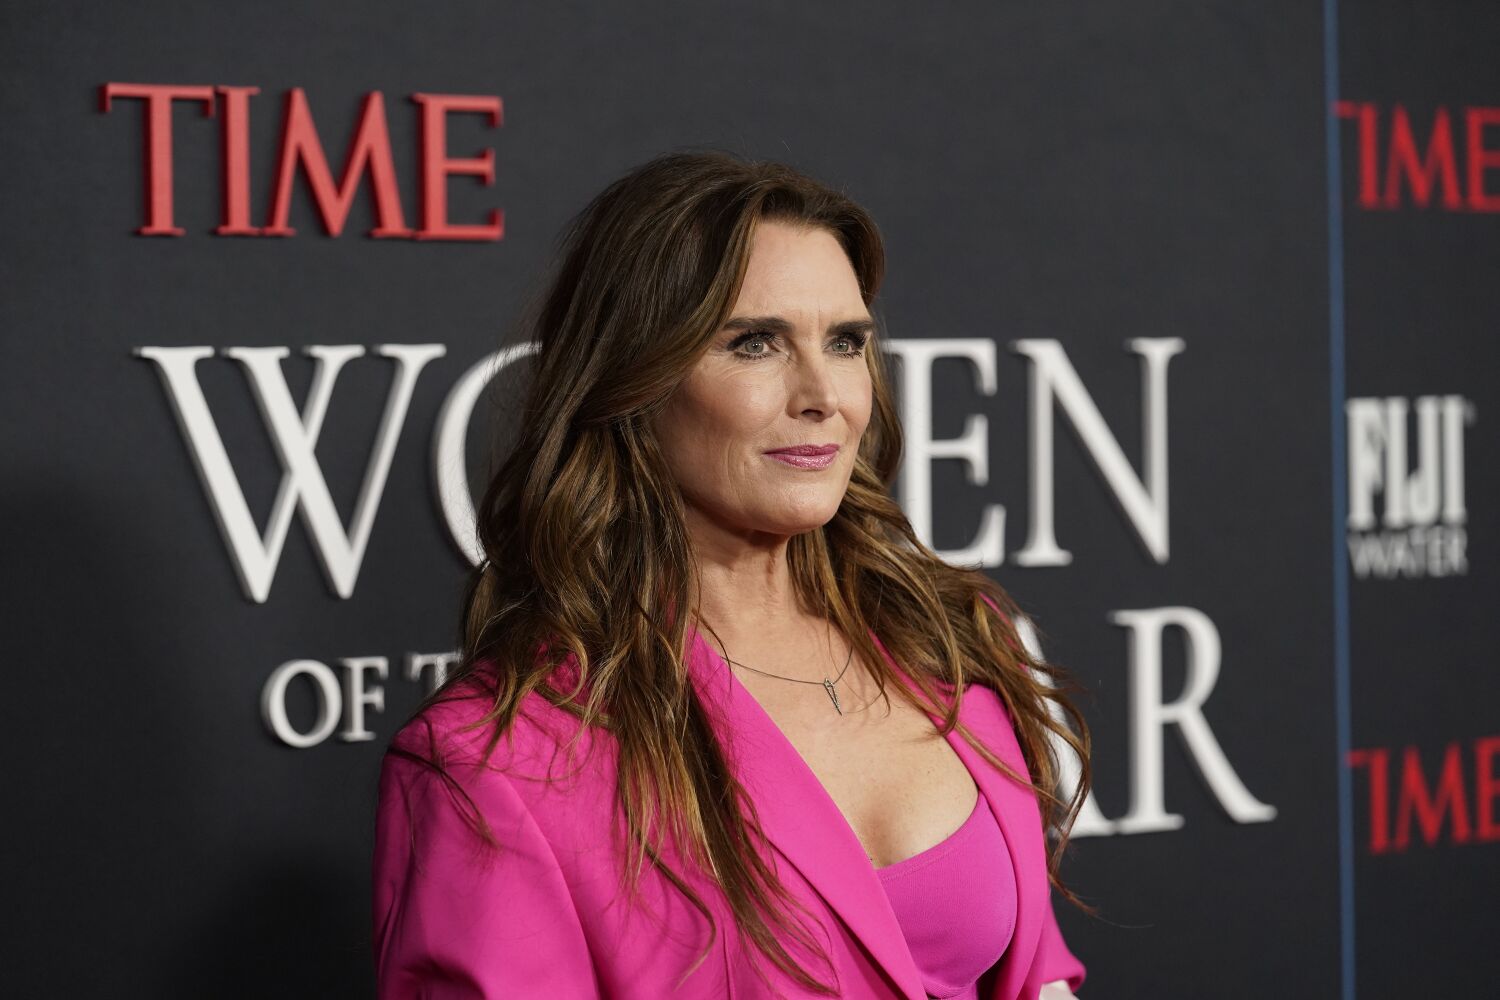 Brooke Shields speaks up about the Hollywood executive she says sexually assaulted her